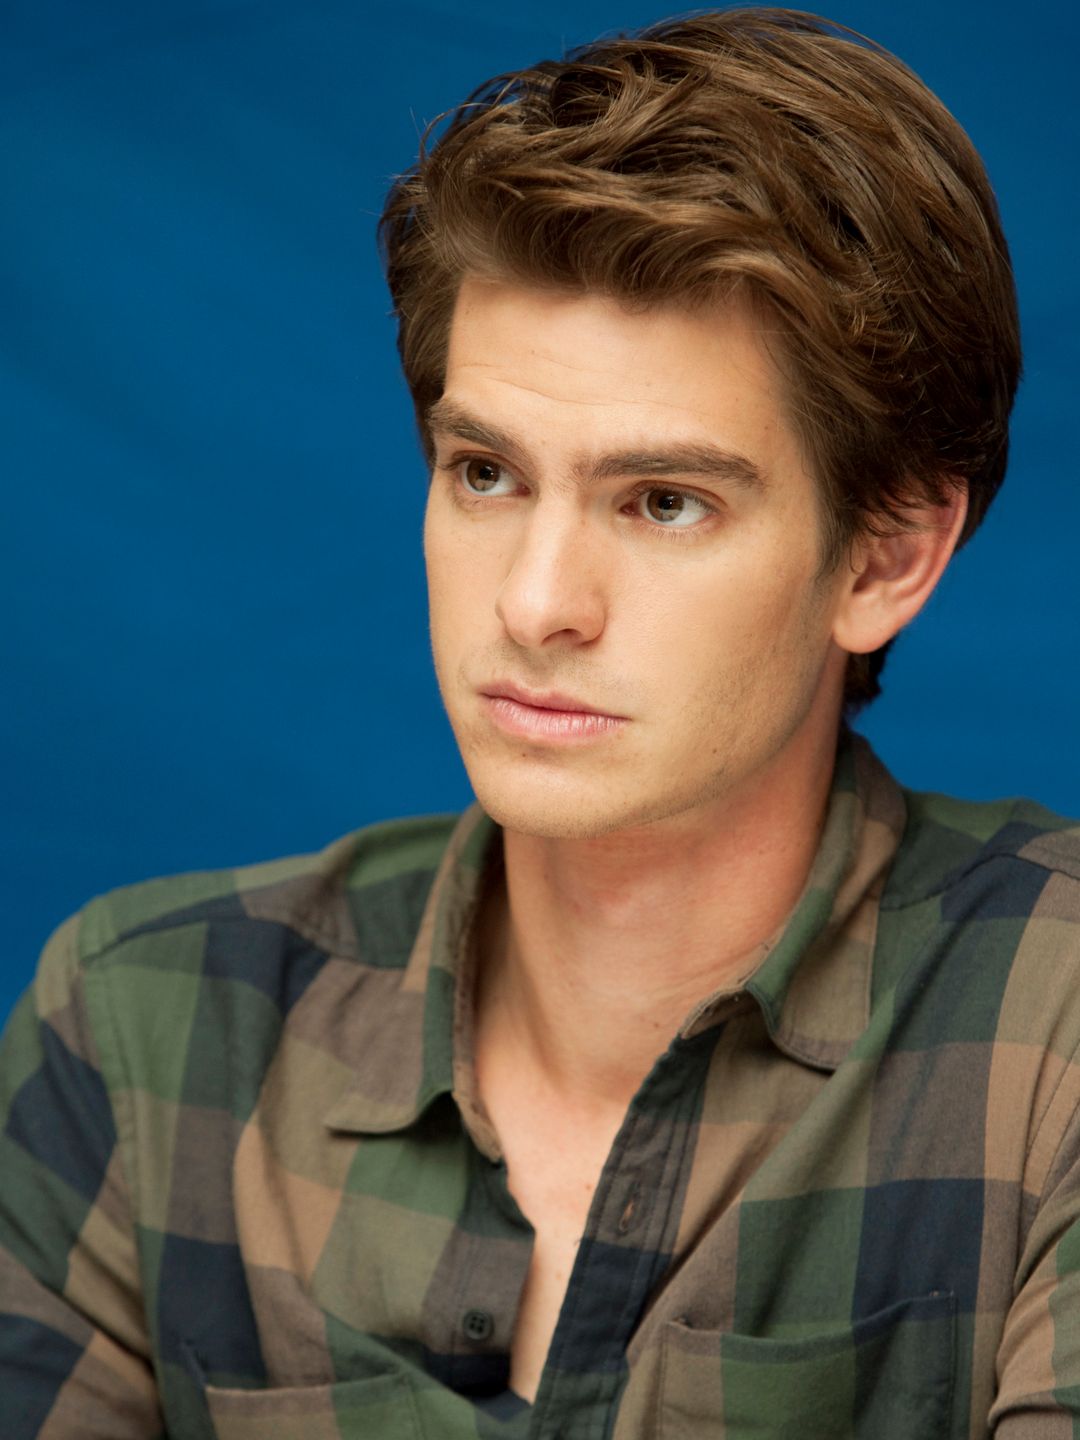 Andrew Garfield young age